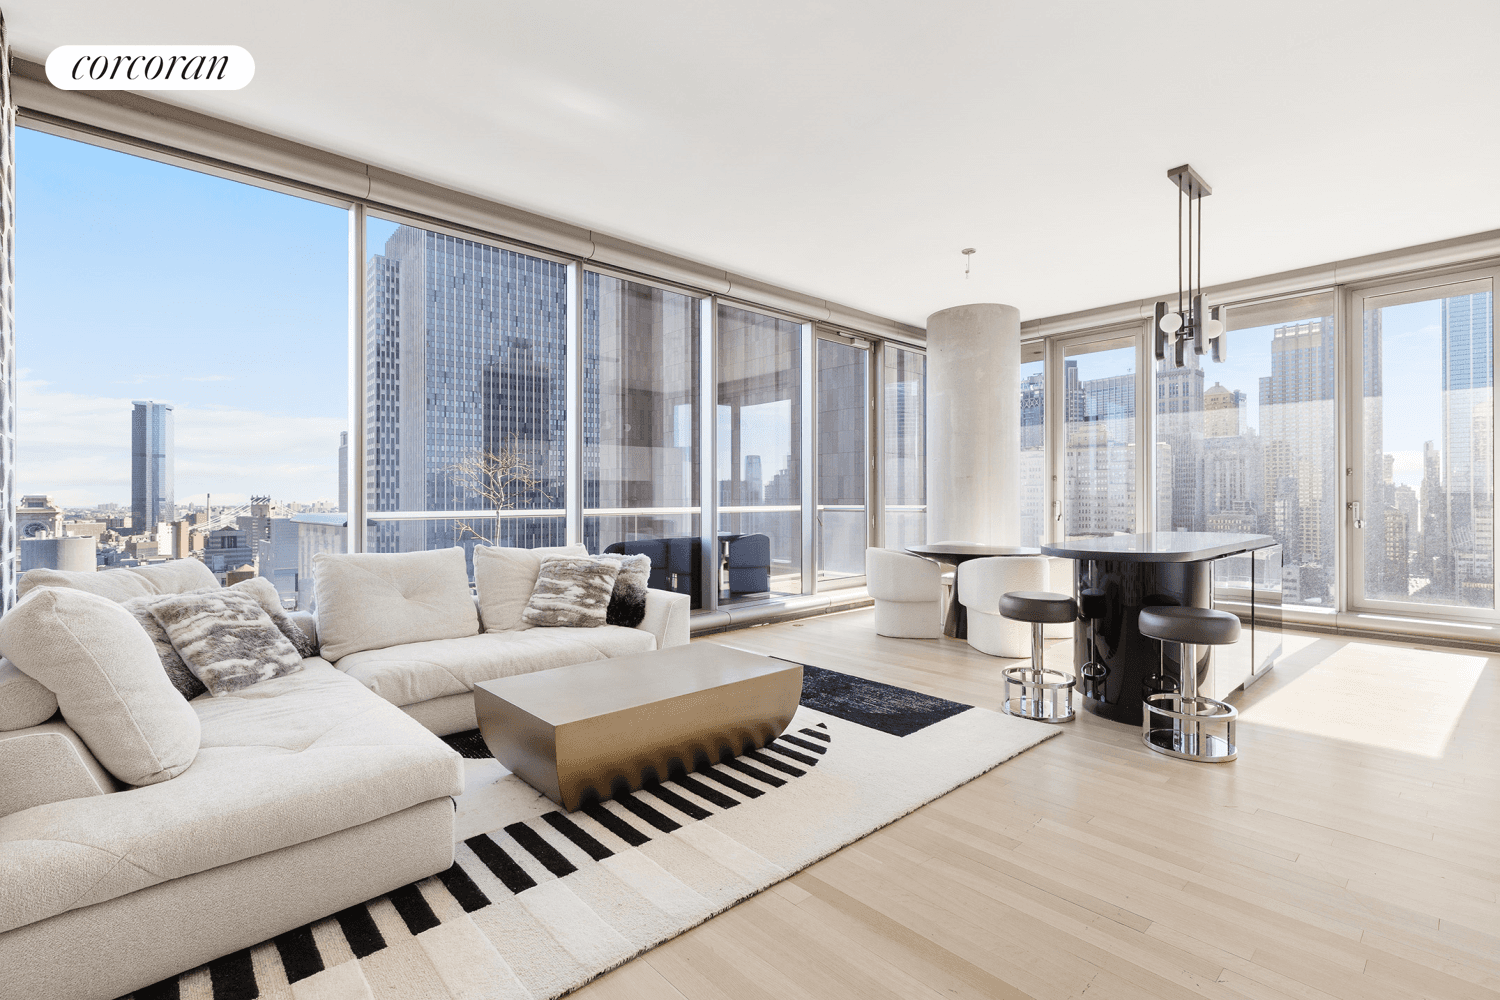 24B East at 56 Leonard is quite striking and offers the best value when compared to other units with the same views and size in the building.